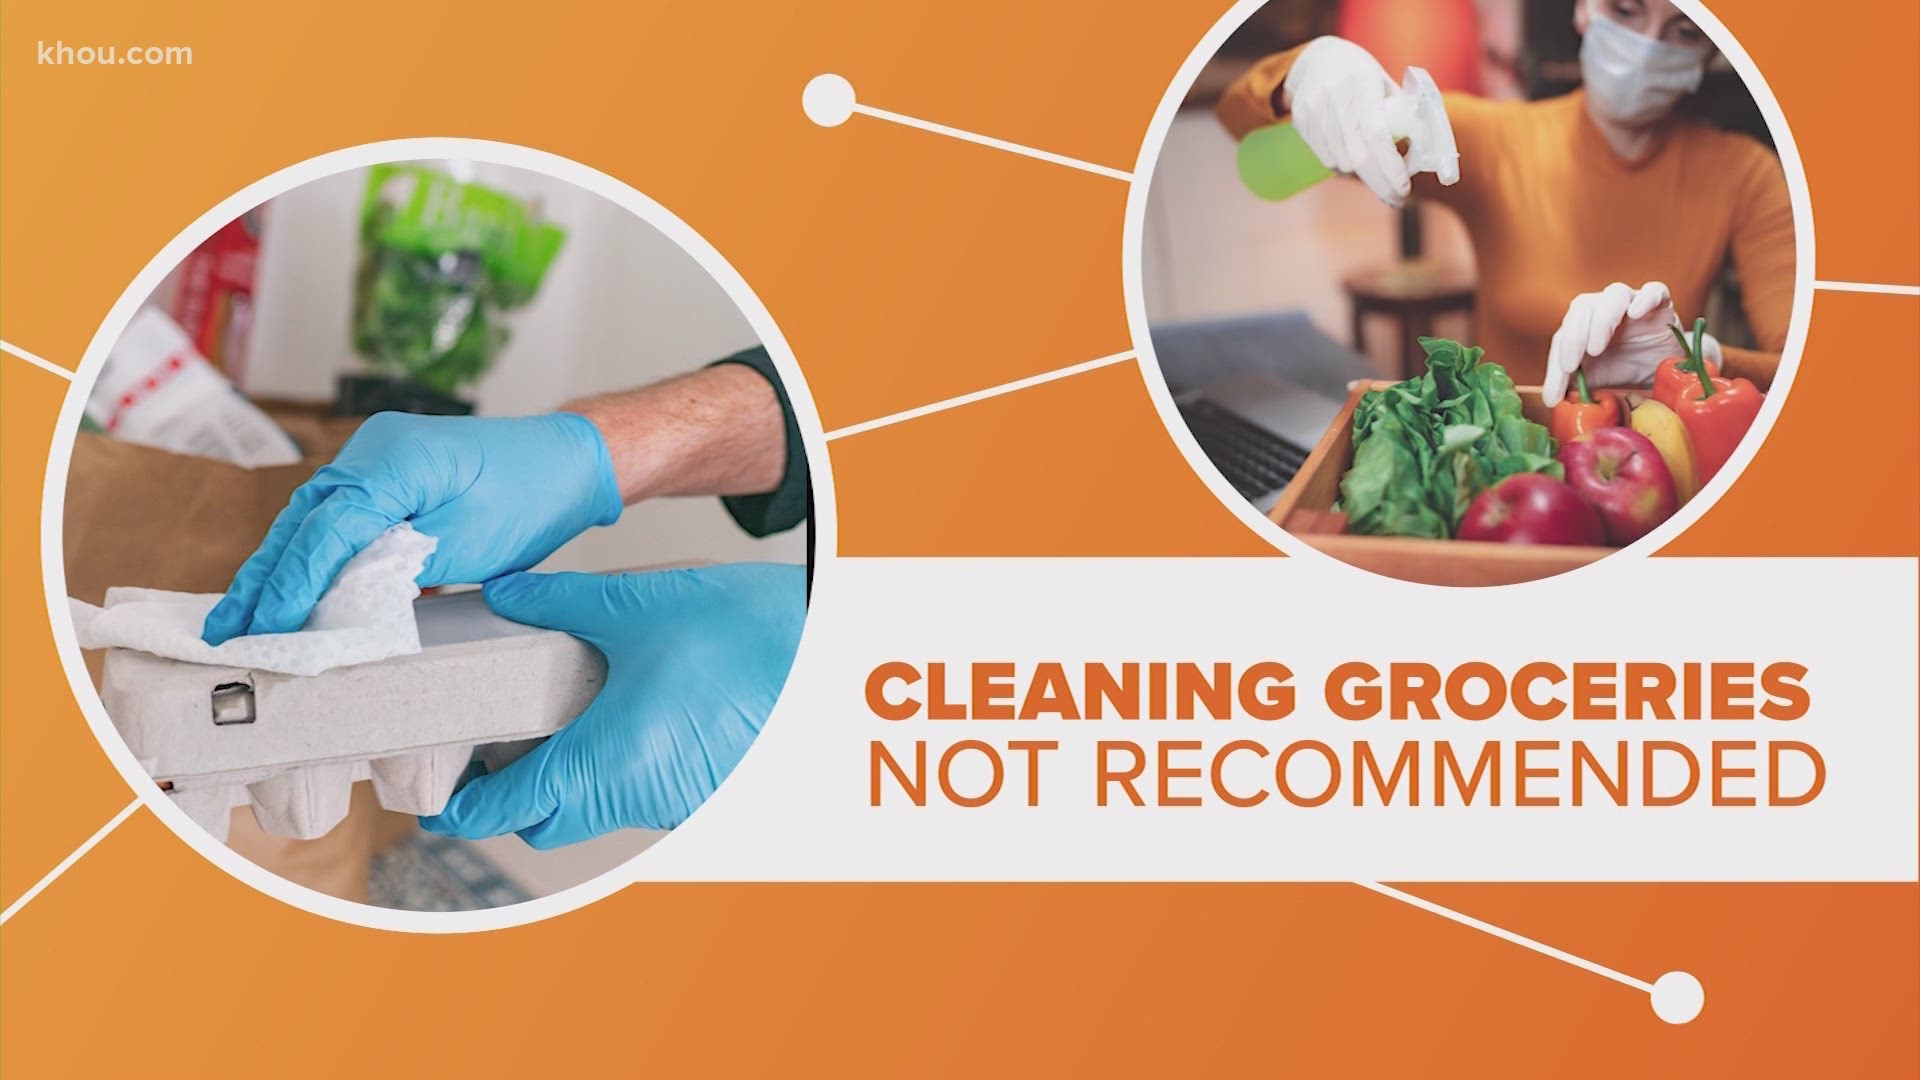 We're connecting the dots on why cleaning your groceries is not necessary. While contaminated surfaces can transmit viruses, it’s not common.